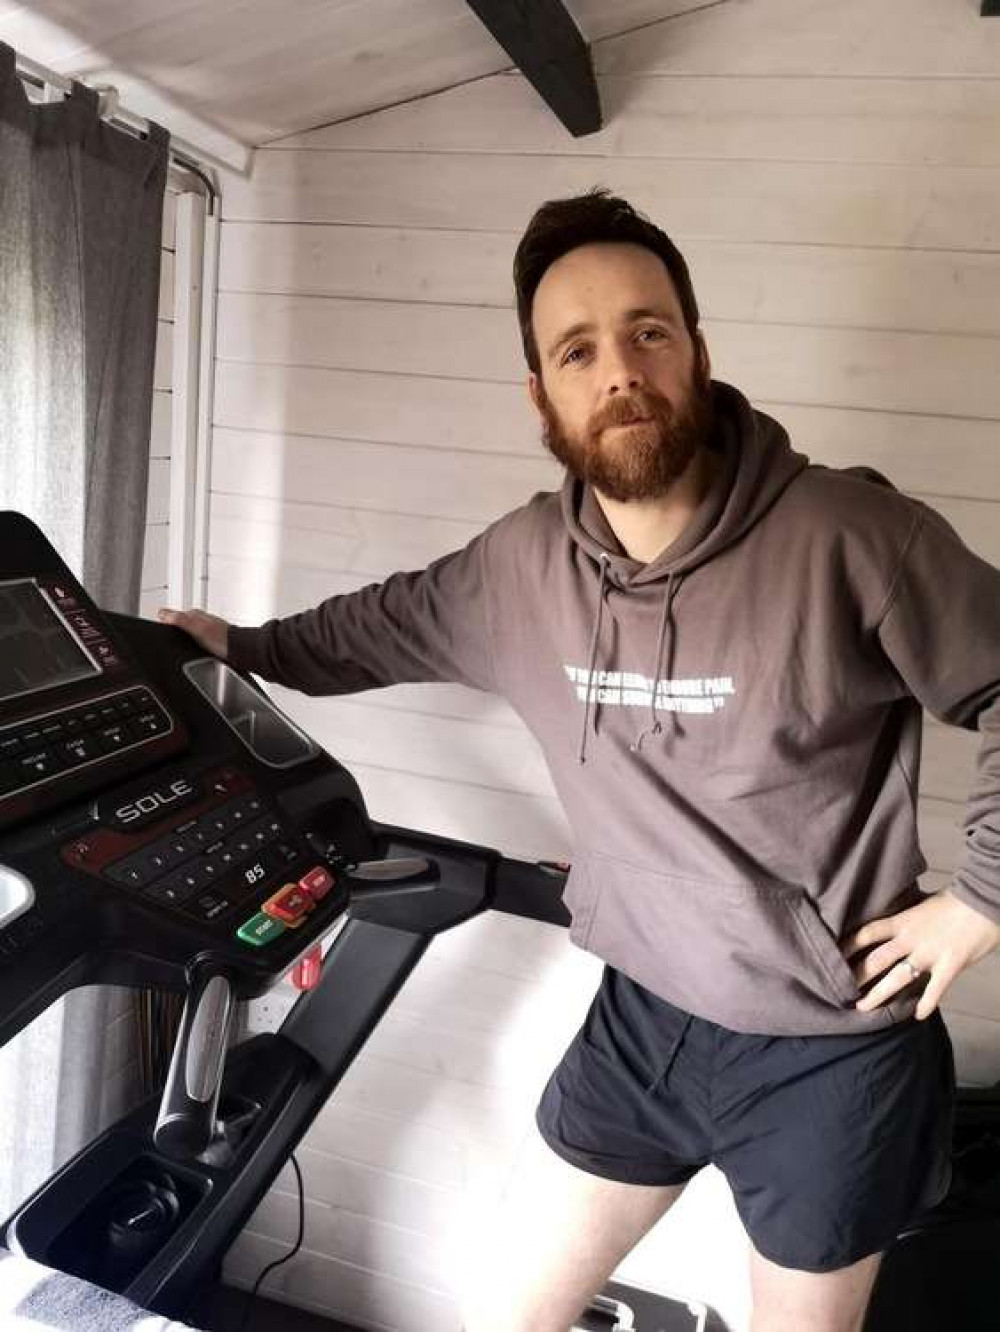 Mr Towers is completing 40 ultramarathons on his treadmill in 40 days. Photo courtesy of Nathan Towers.